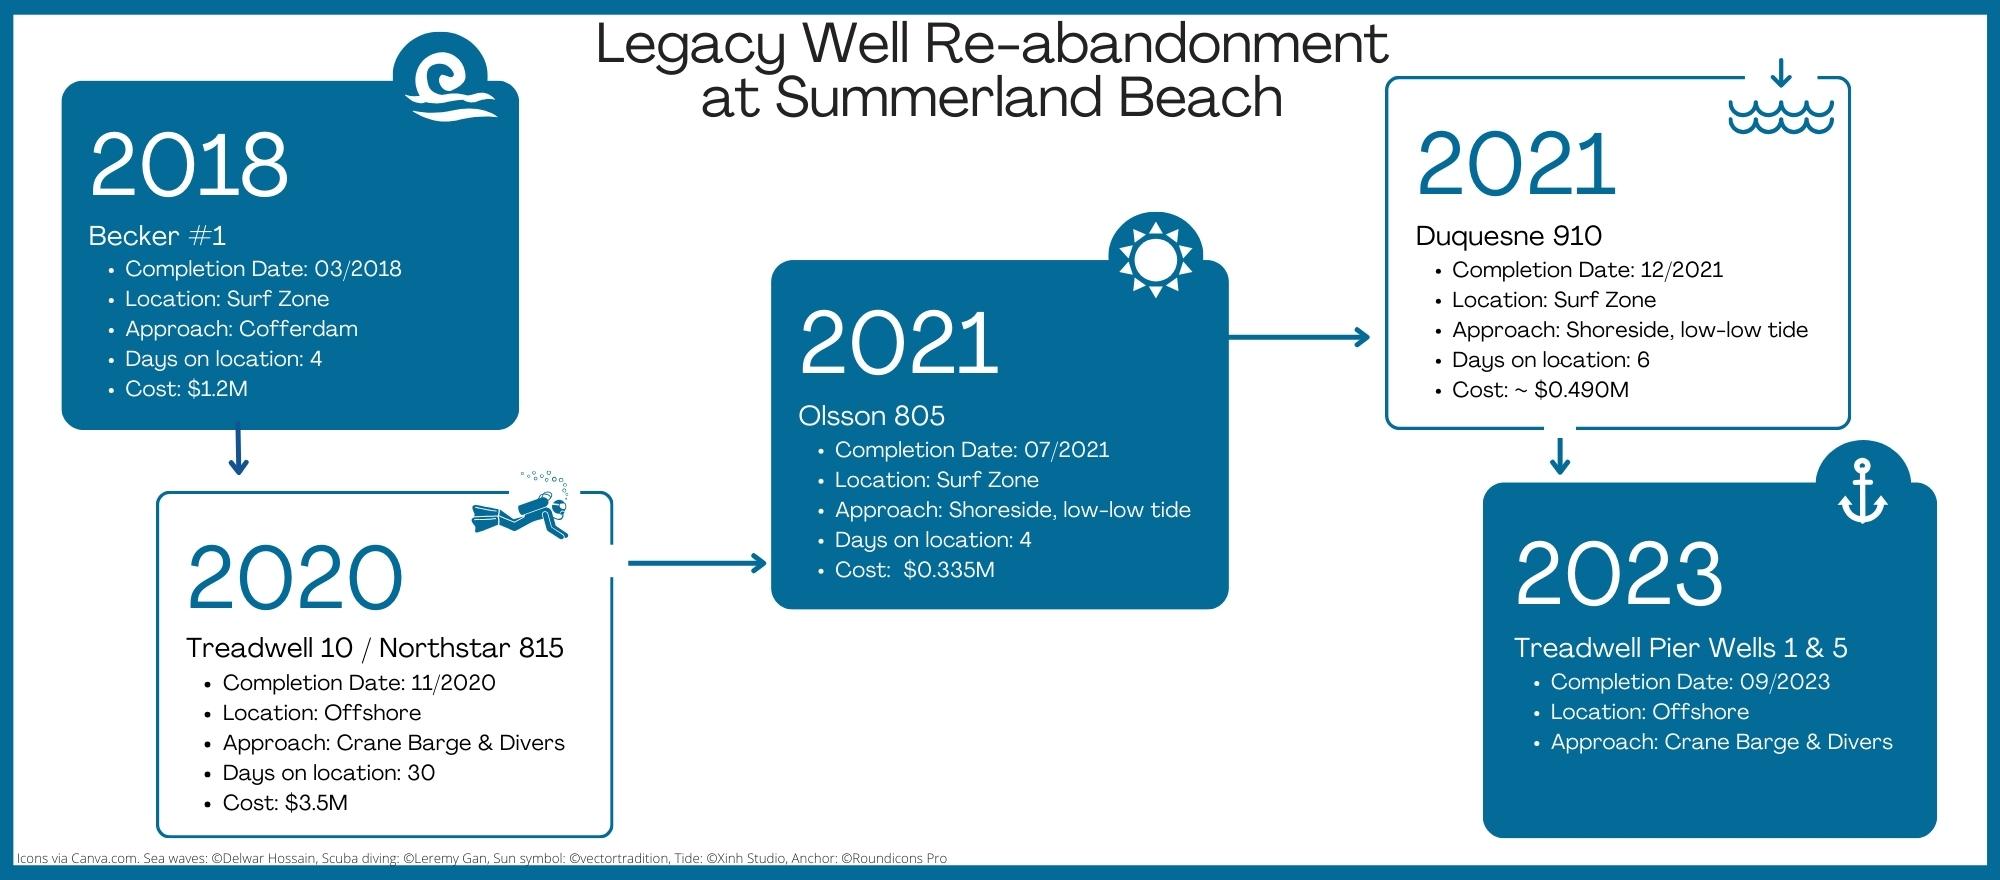 Legacy Well Re-abandonment at Summerland Beach. 2018 Becker Well completion, 2020 Treadwell 10 / Northstar 815 completion, 2021 Olsson 805 completion and Duquesne 910 completion, 2023 Treadwell Pier Wells 1 and 5 completion.